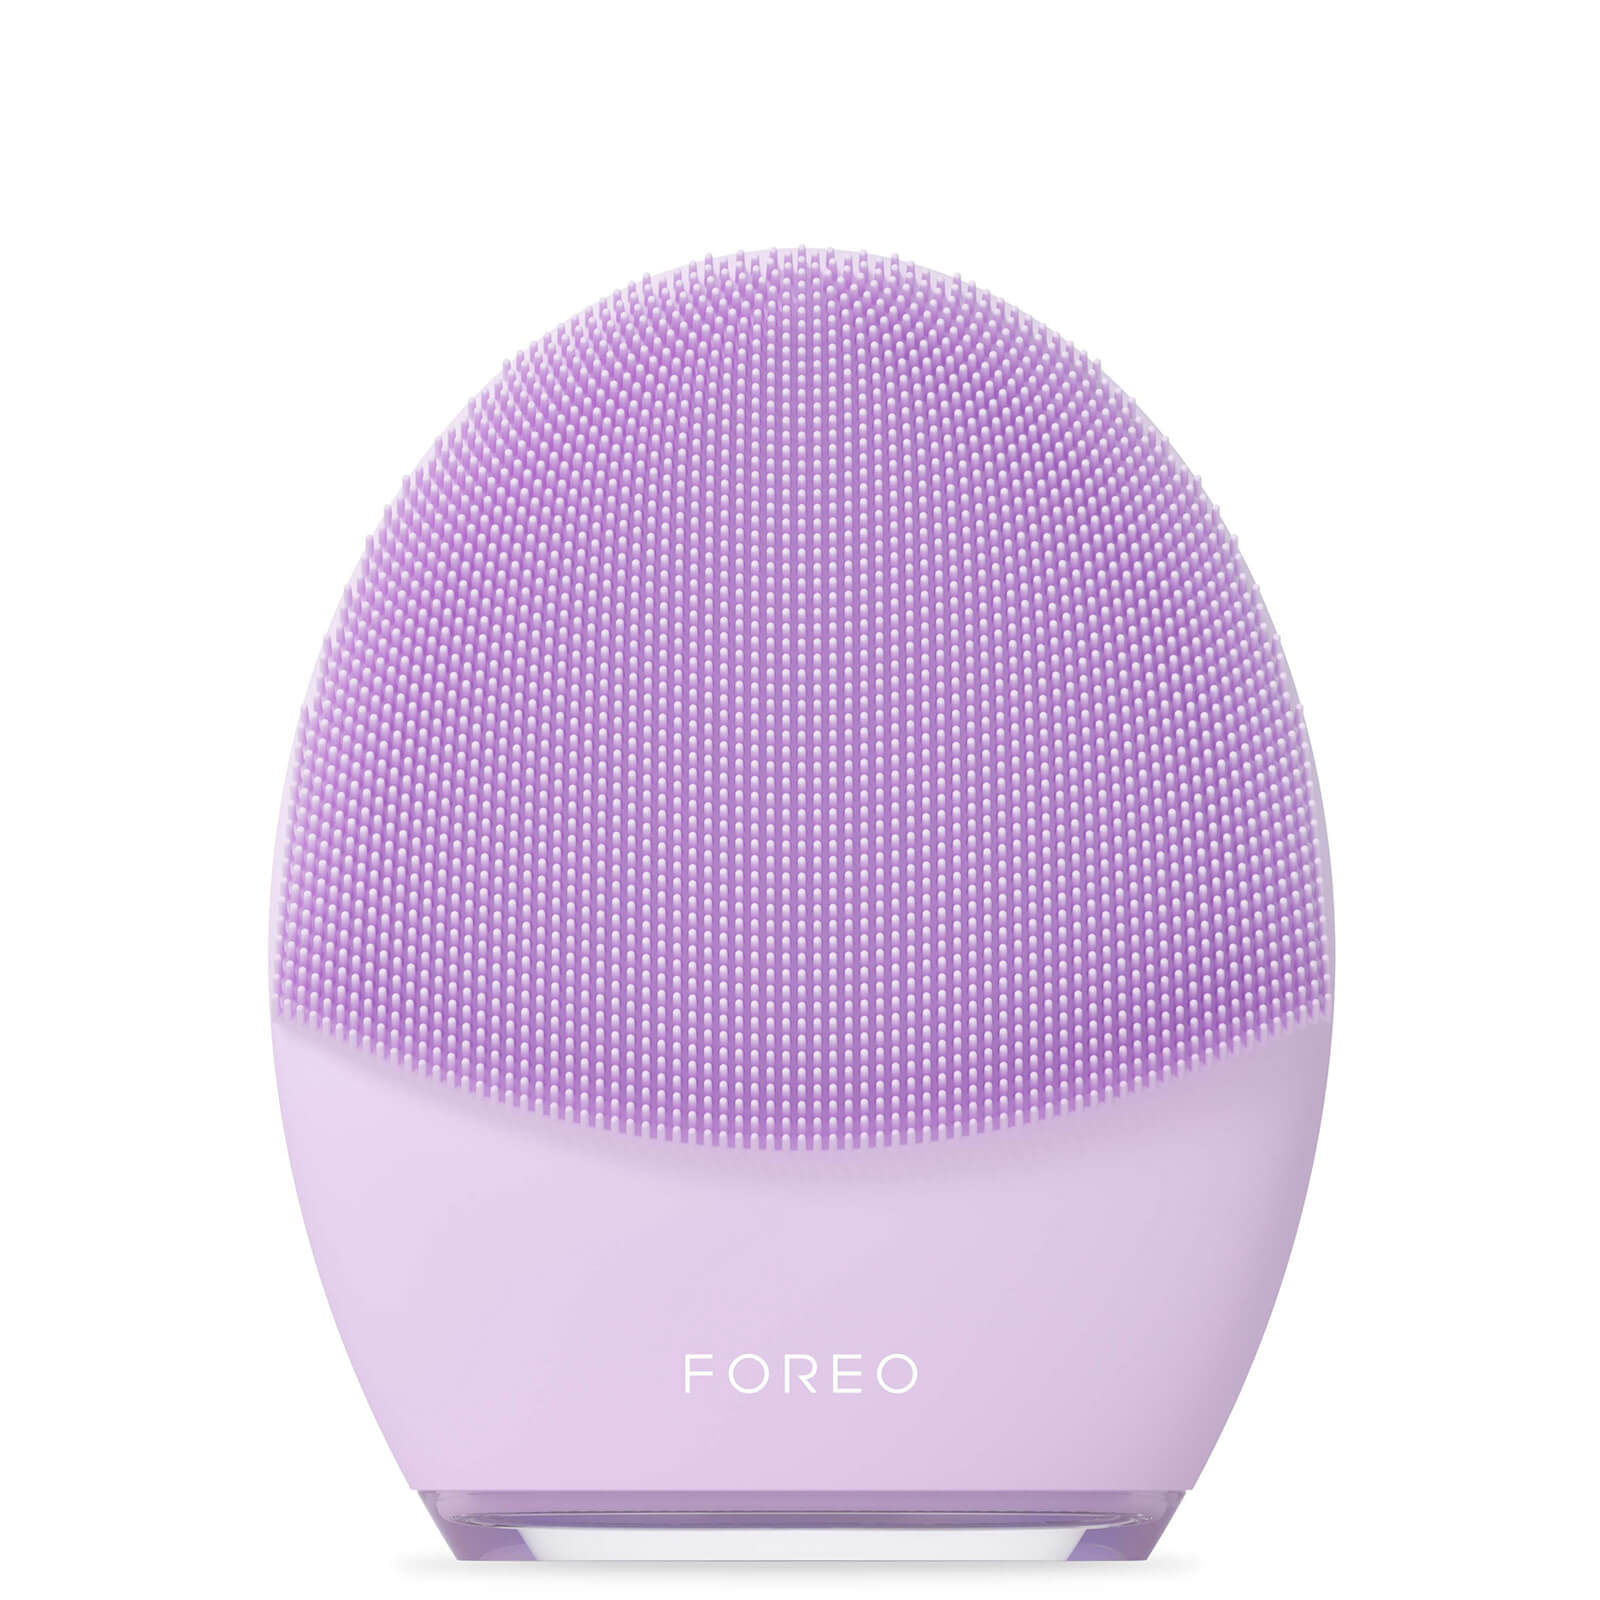 Foreo Luna 4 Smart Facial Cleansing And Firming Massage Device - Sensitive Skin